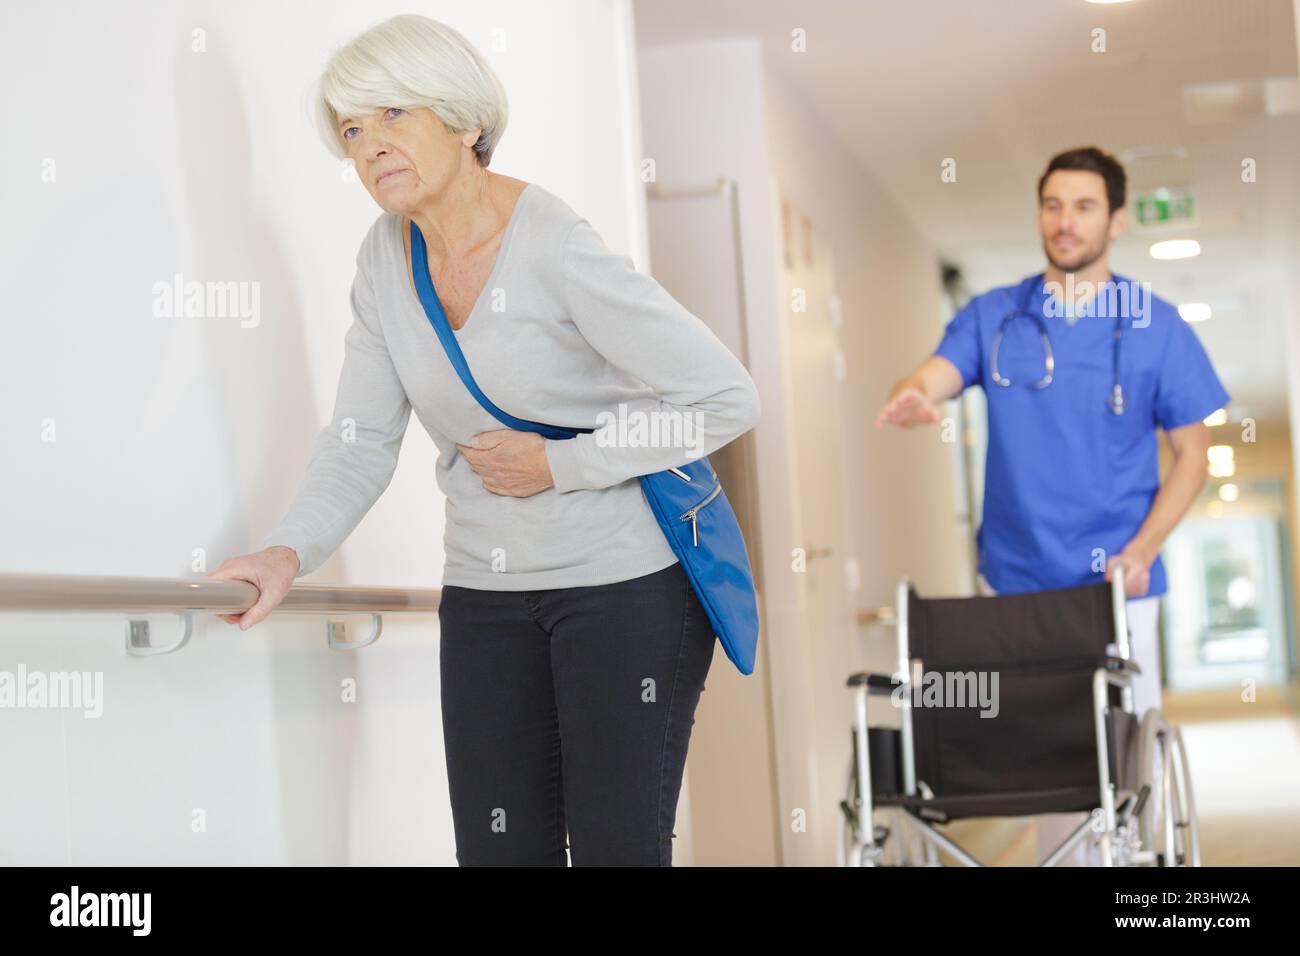 old woman needing help from nurse in hospital Stock Photo